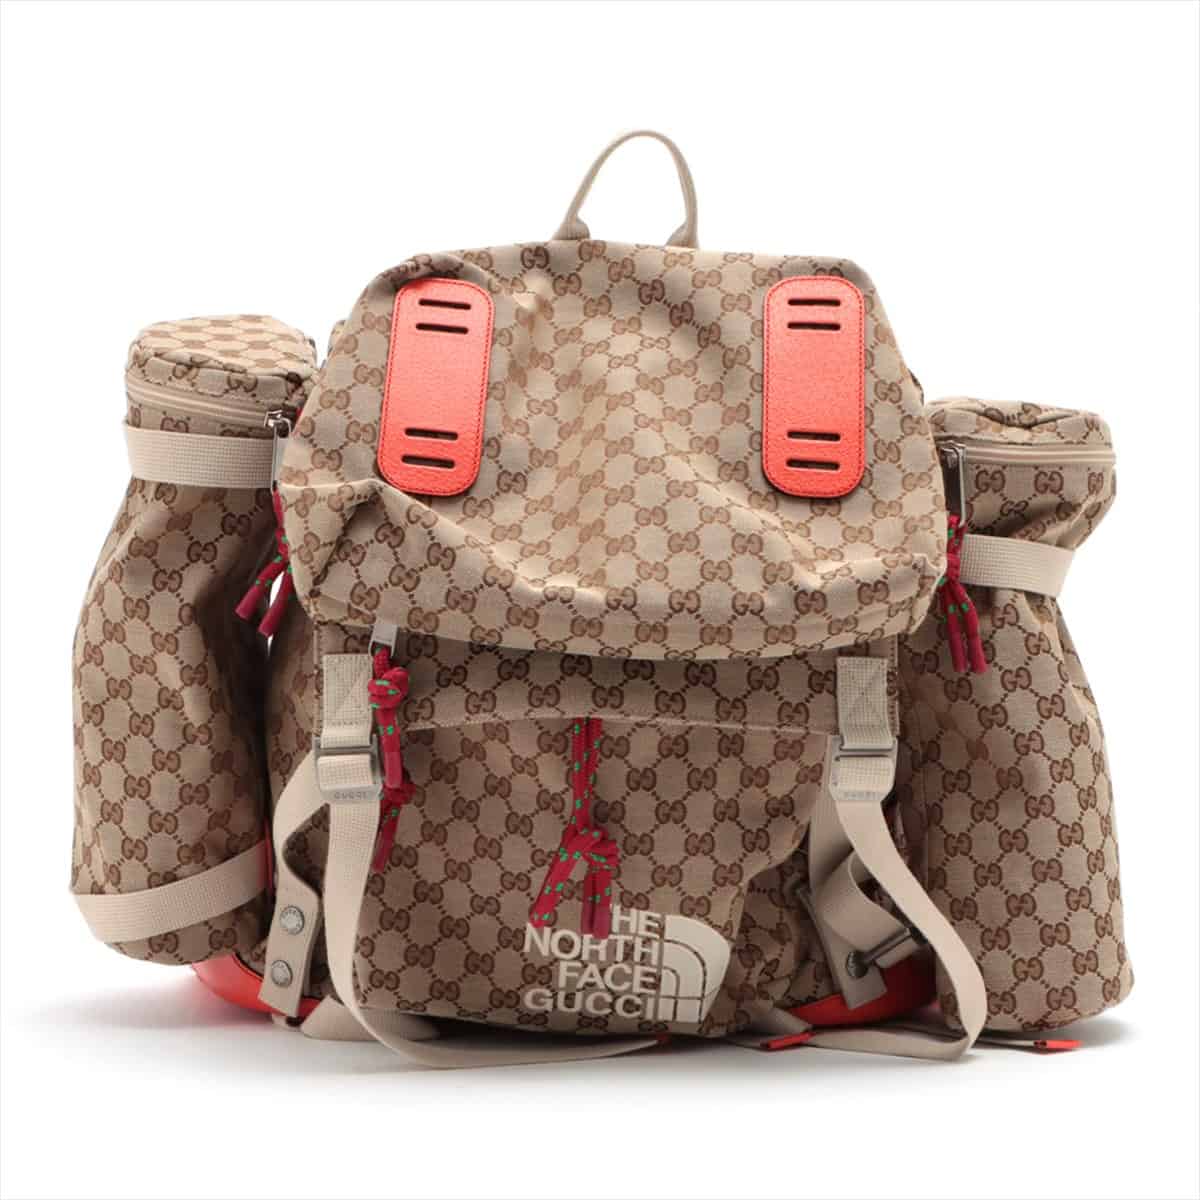 Gucci x North Face Canvas & leather Backpack Beige 650294